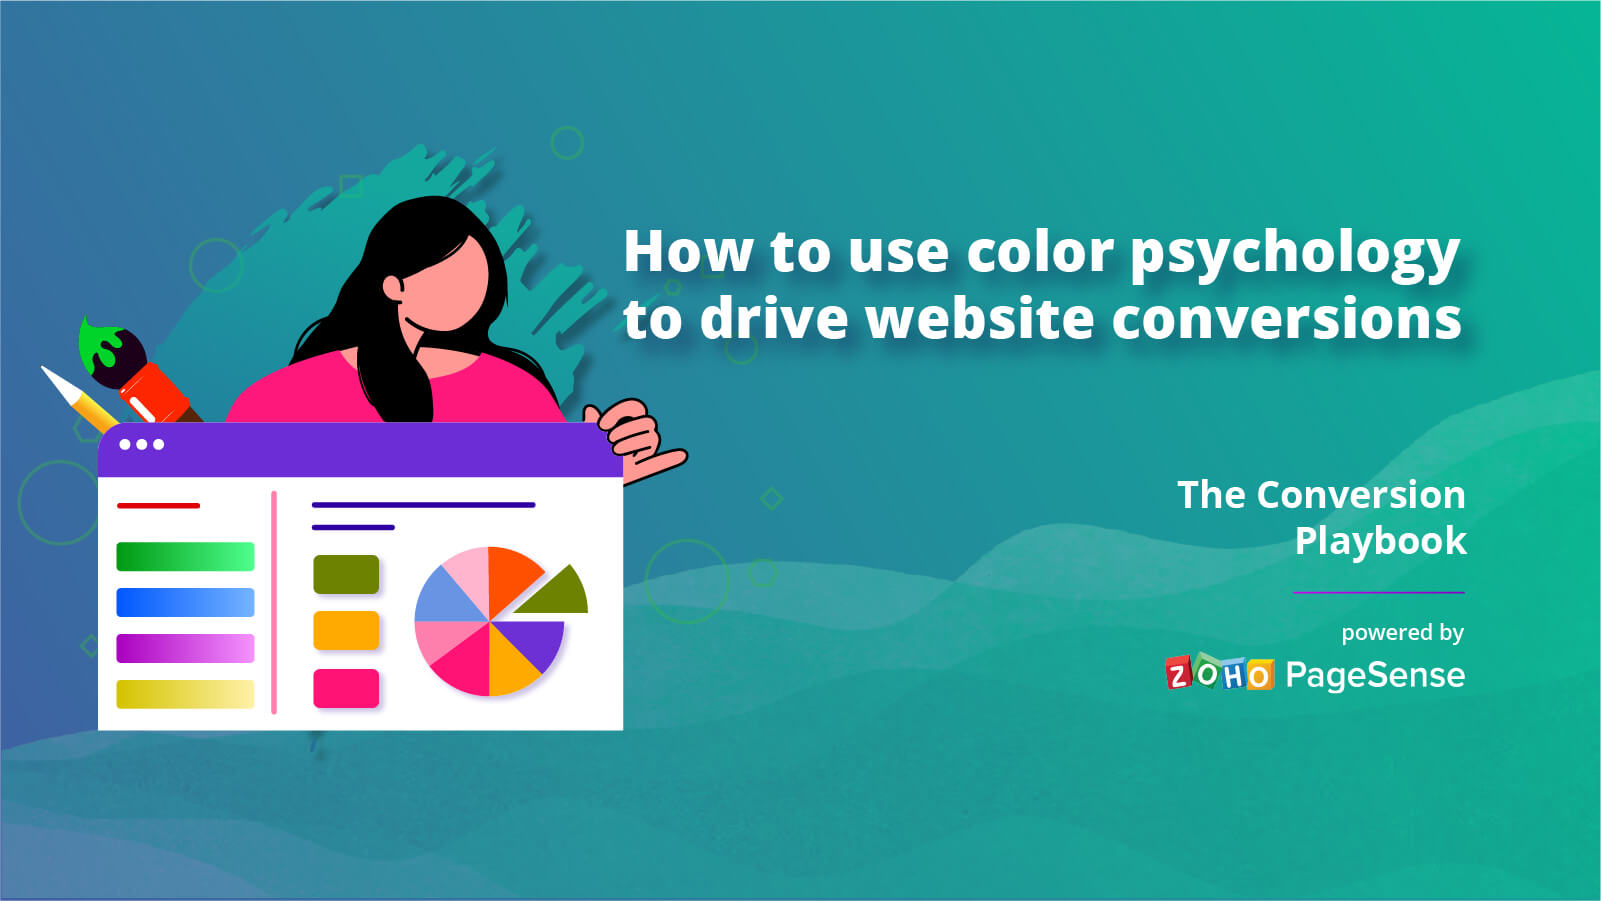 How to use color psychology to drive website conversions 